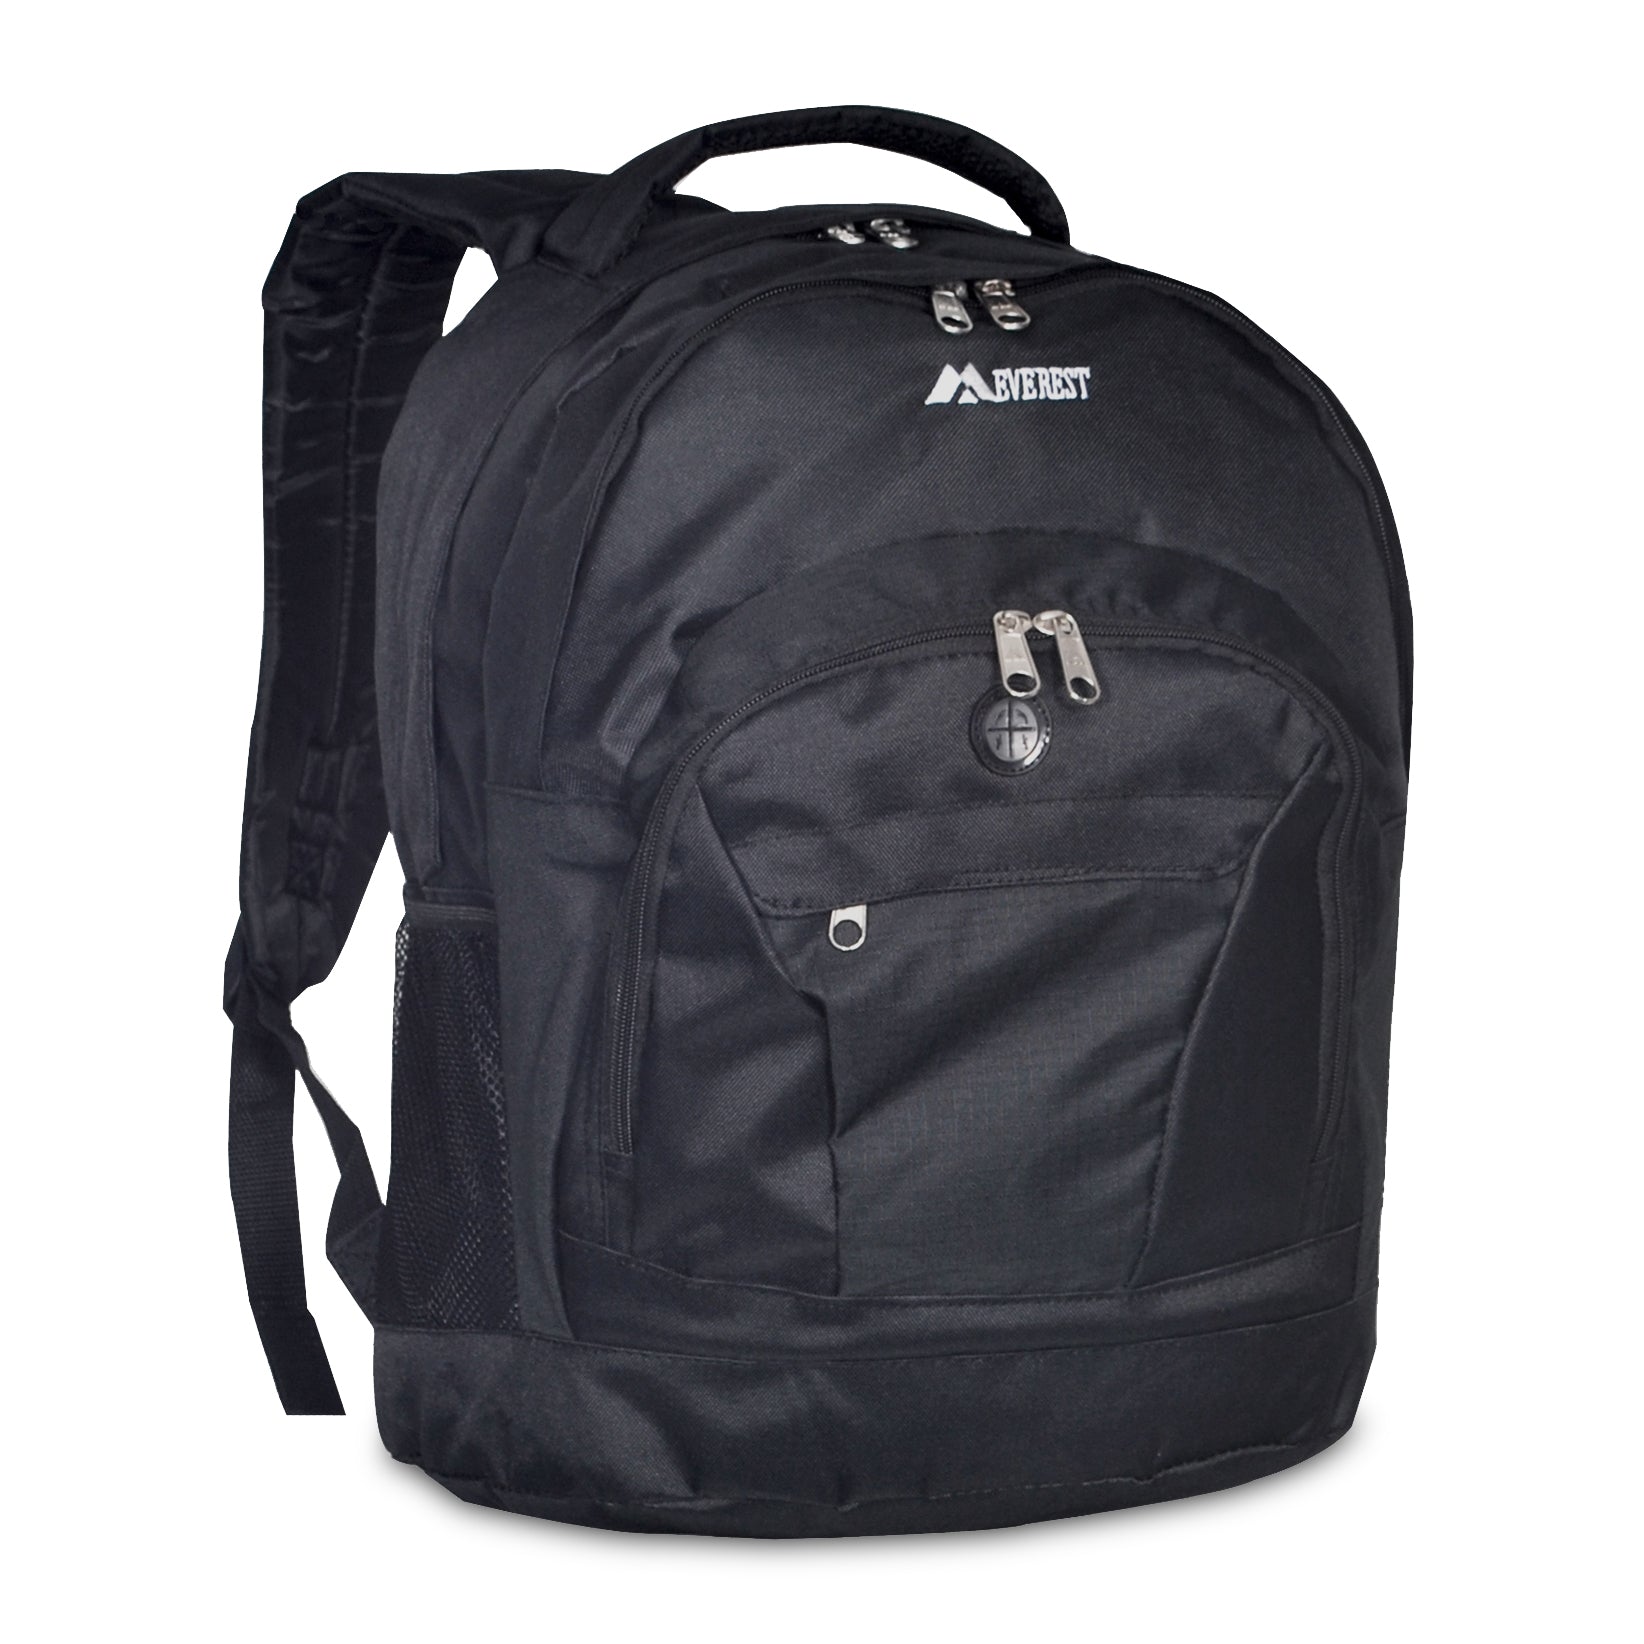 Everest-Deluxe Double Compartment Backpack